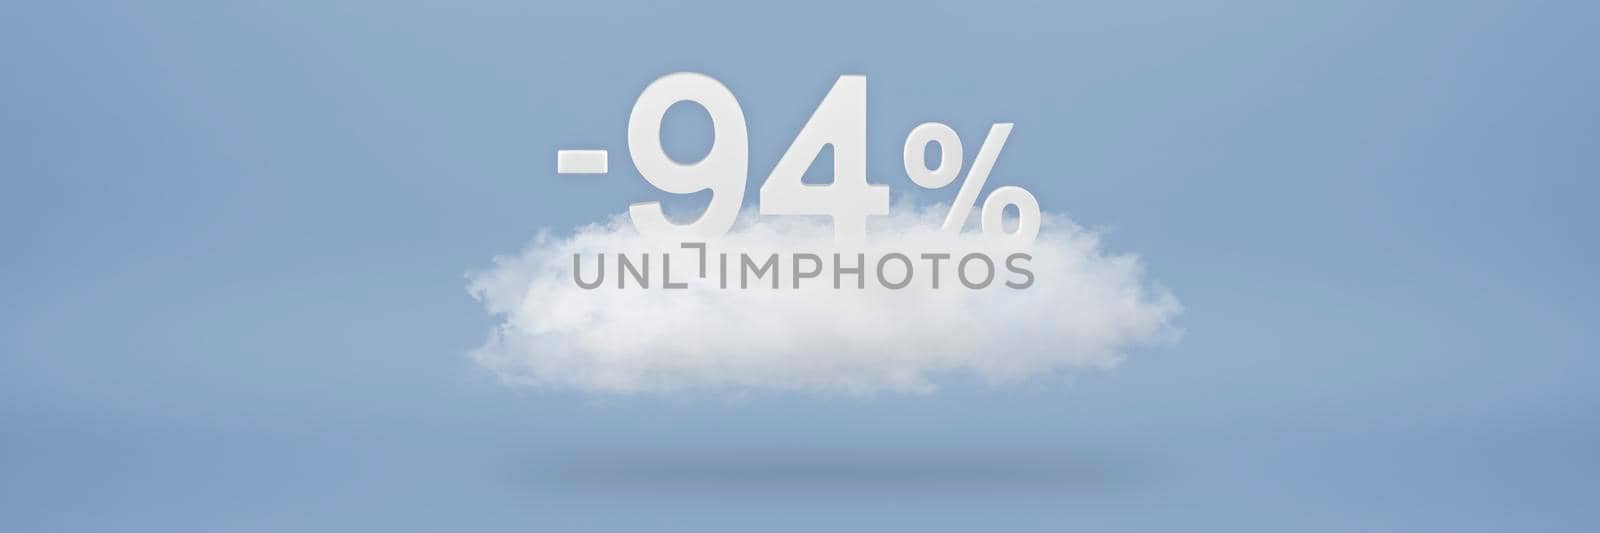 Discount 94 percent. Big discounts, sale up to ninety four percent. 3D numbers float on a cloud on a blue background. Copy space. Advertising banner and poster to be inserted into the project by SERSOL